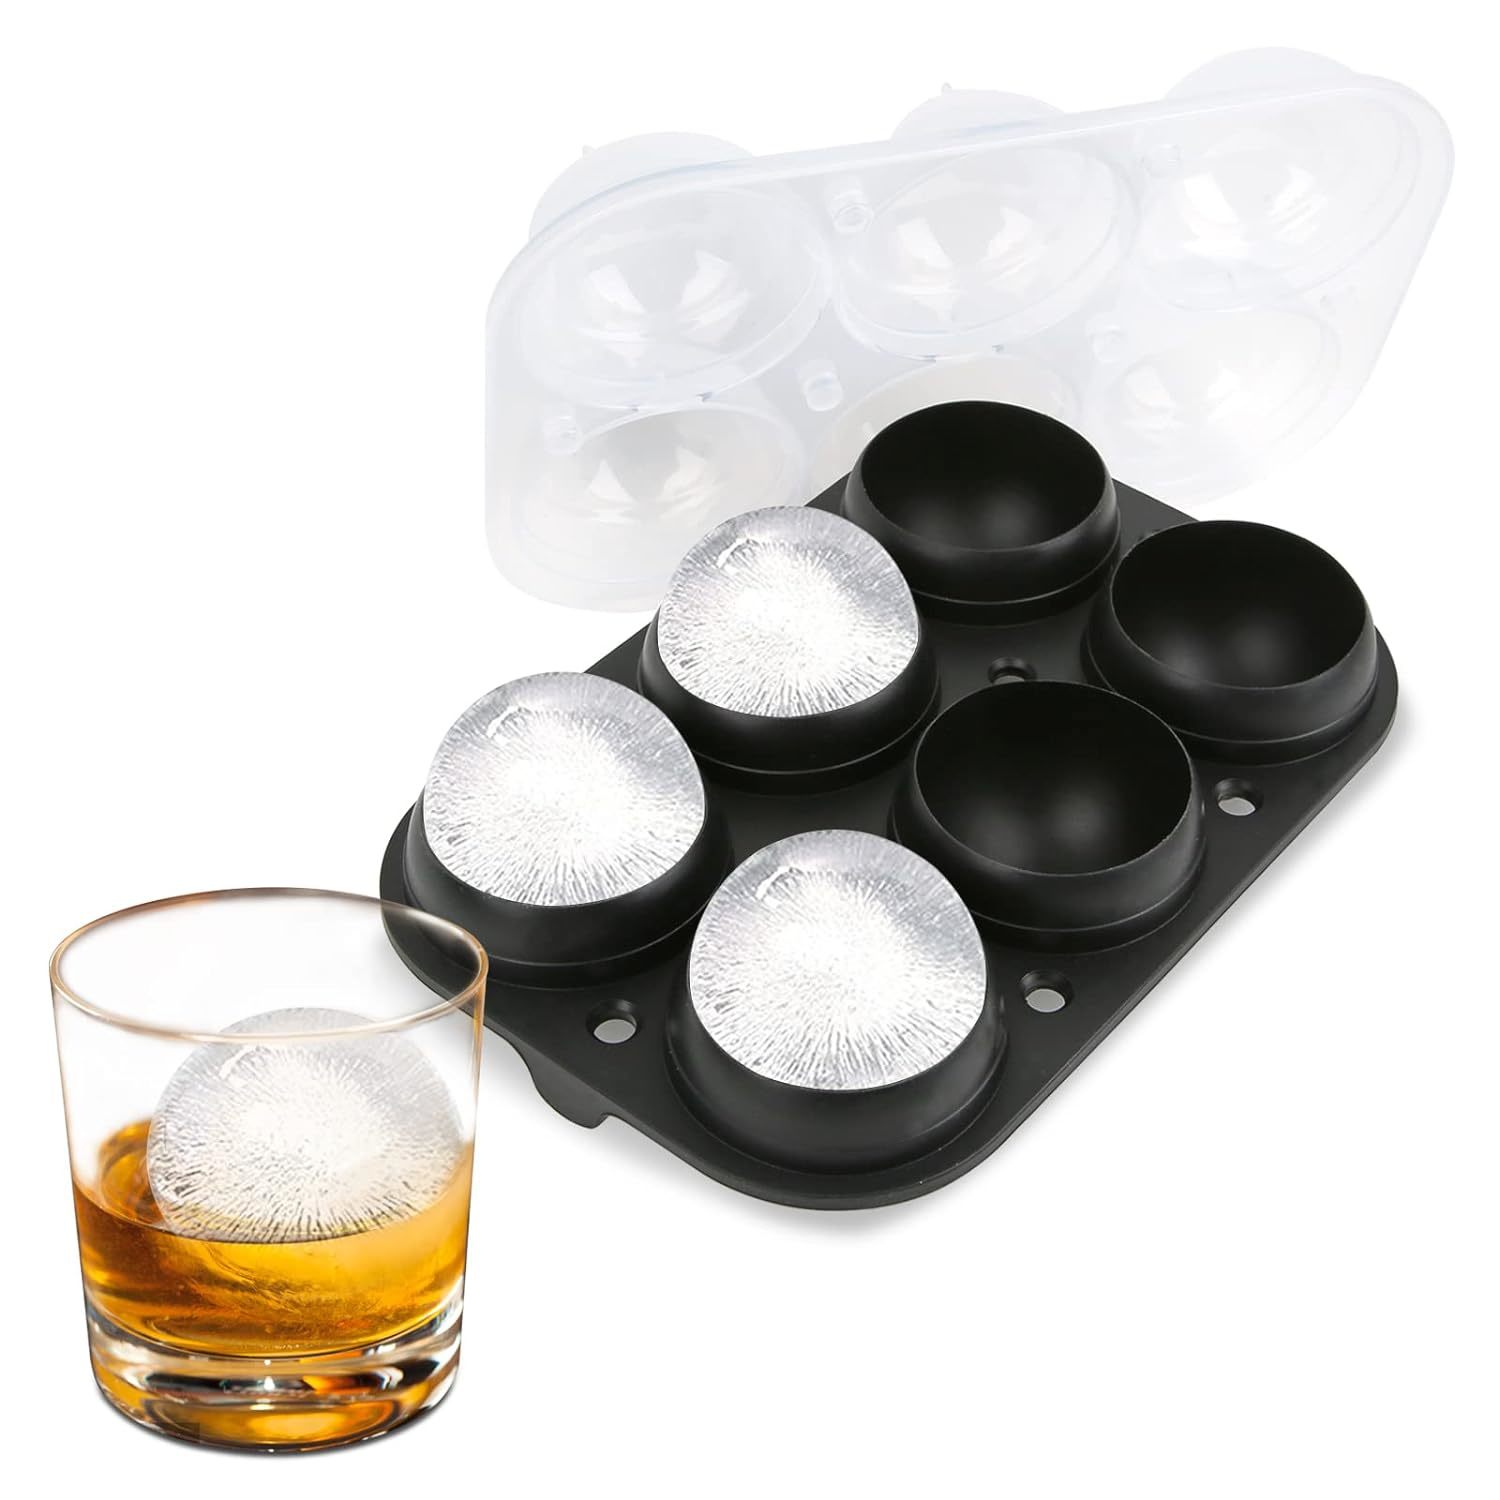 Large Ice Ball Maker With Lid, 6 X 2.5 Inch Ice Balls - Bpa Free, Easy To Fill R - $28.99